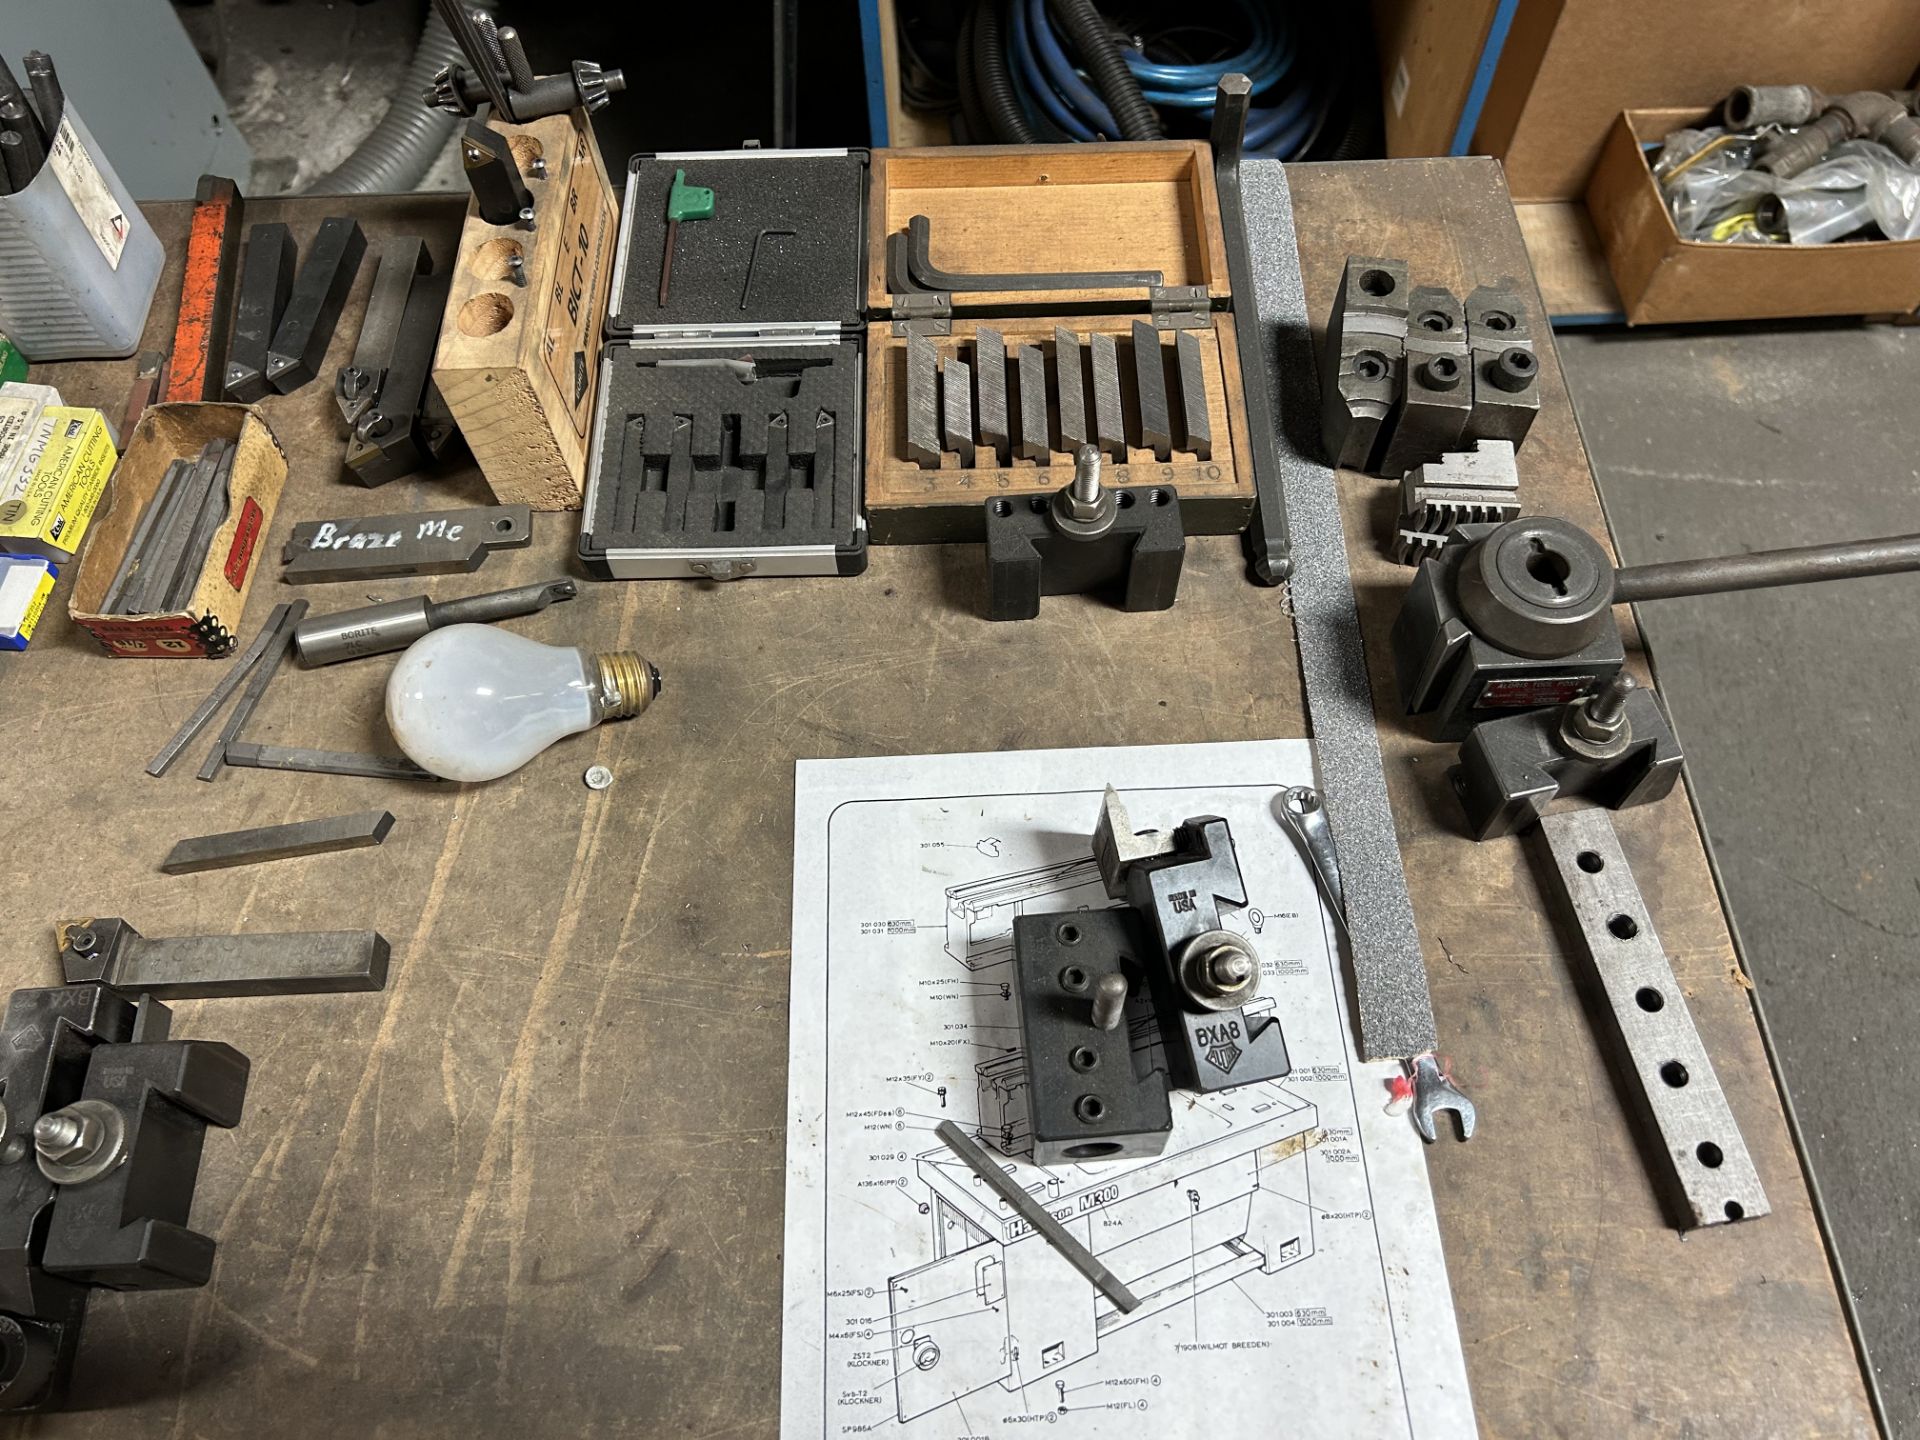 Milling Bits, Hand Tools, Measurement Tools (Does Not Include Table), Rigging/Loading Fee: $30 - Image 2 of 7